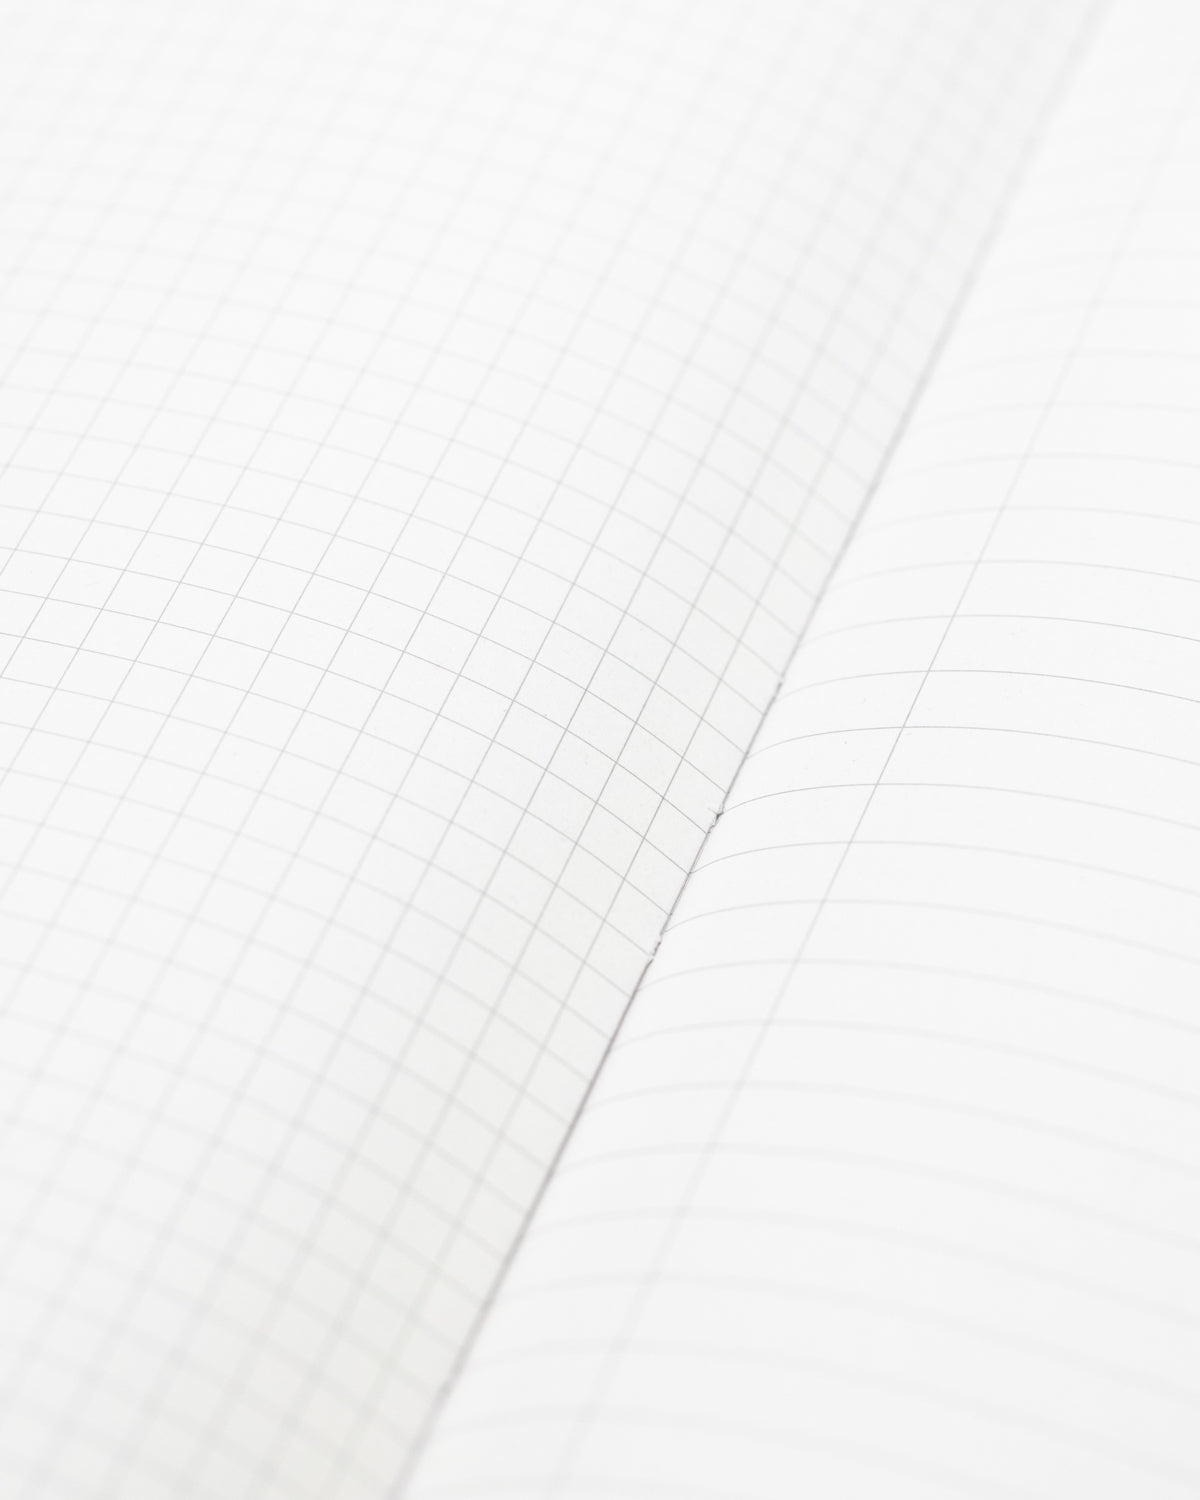 A white Hypothesis Mystery Notebook 6-pack with a grid on it from Cognitive Surplus.